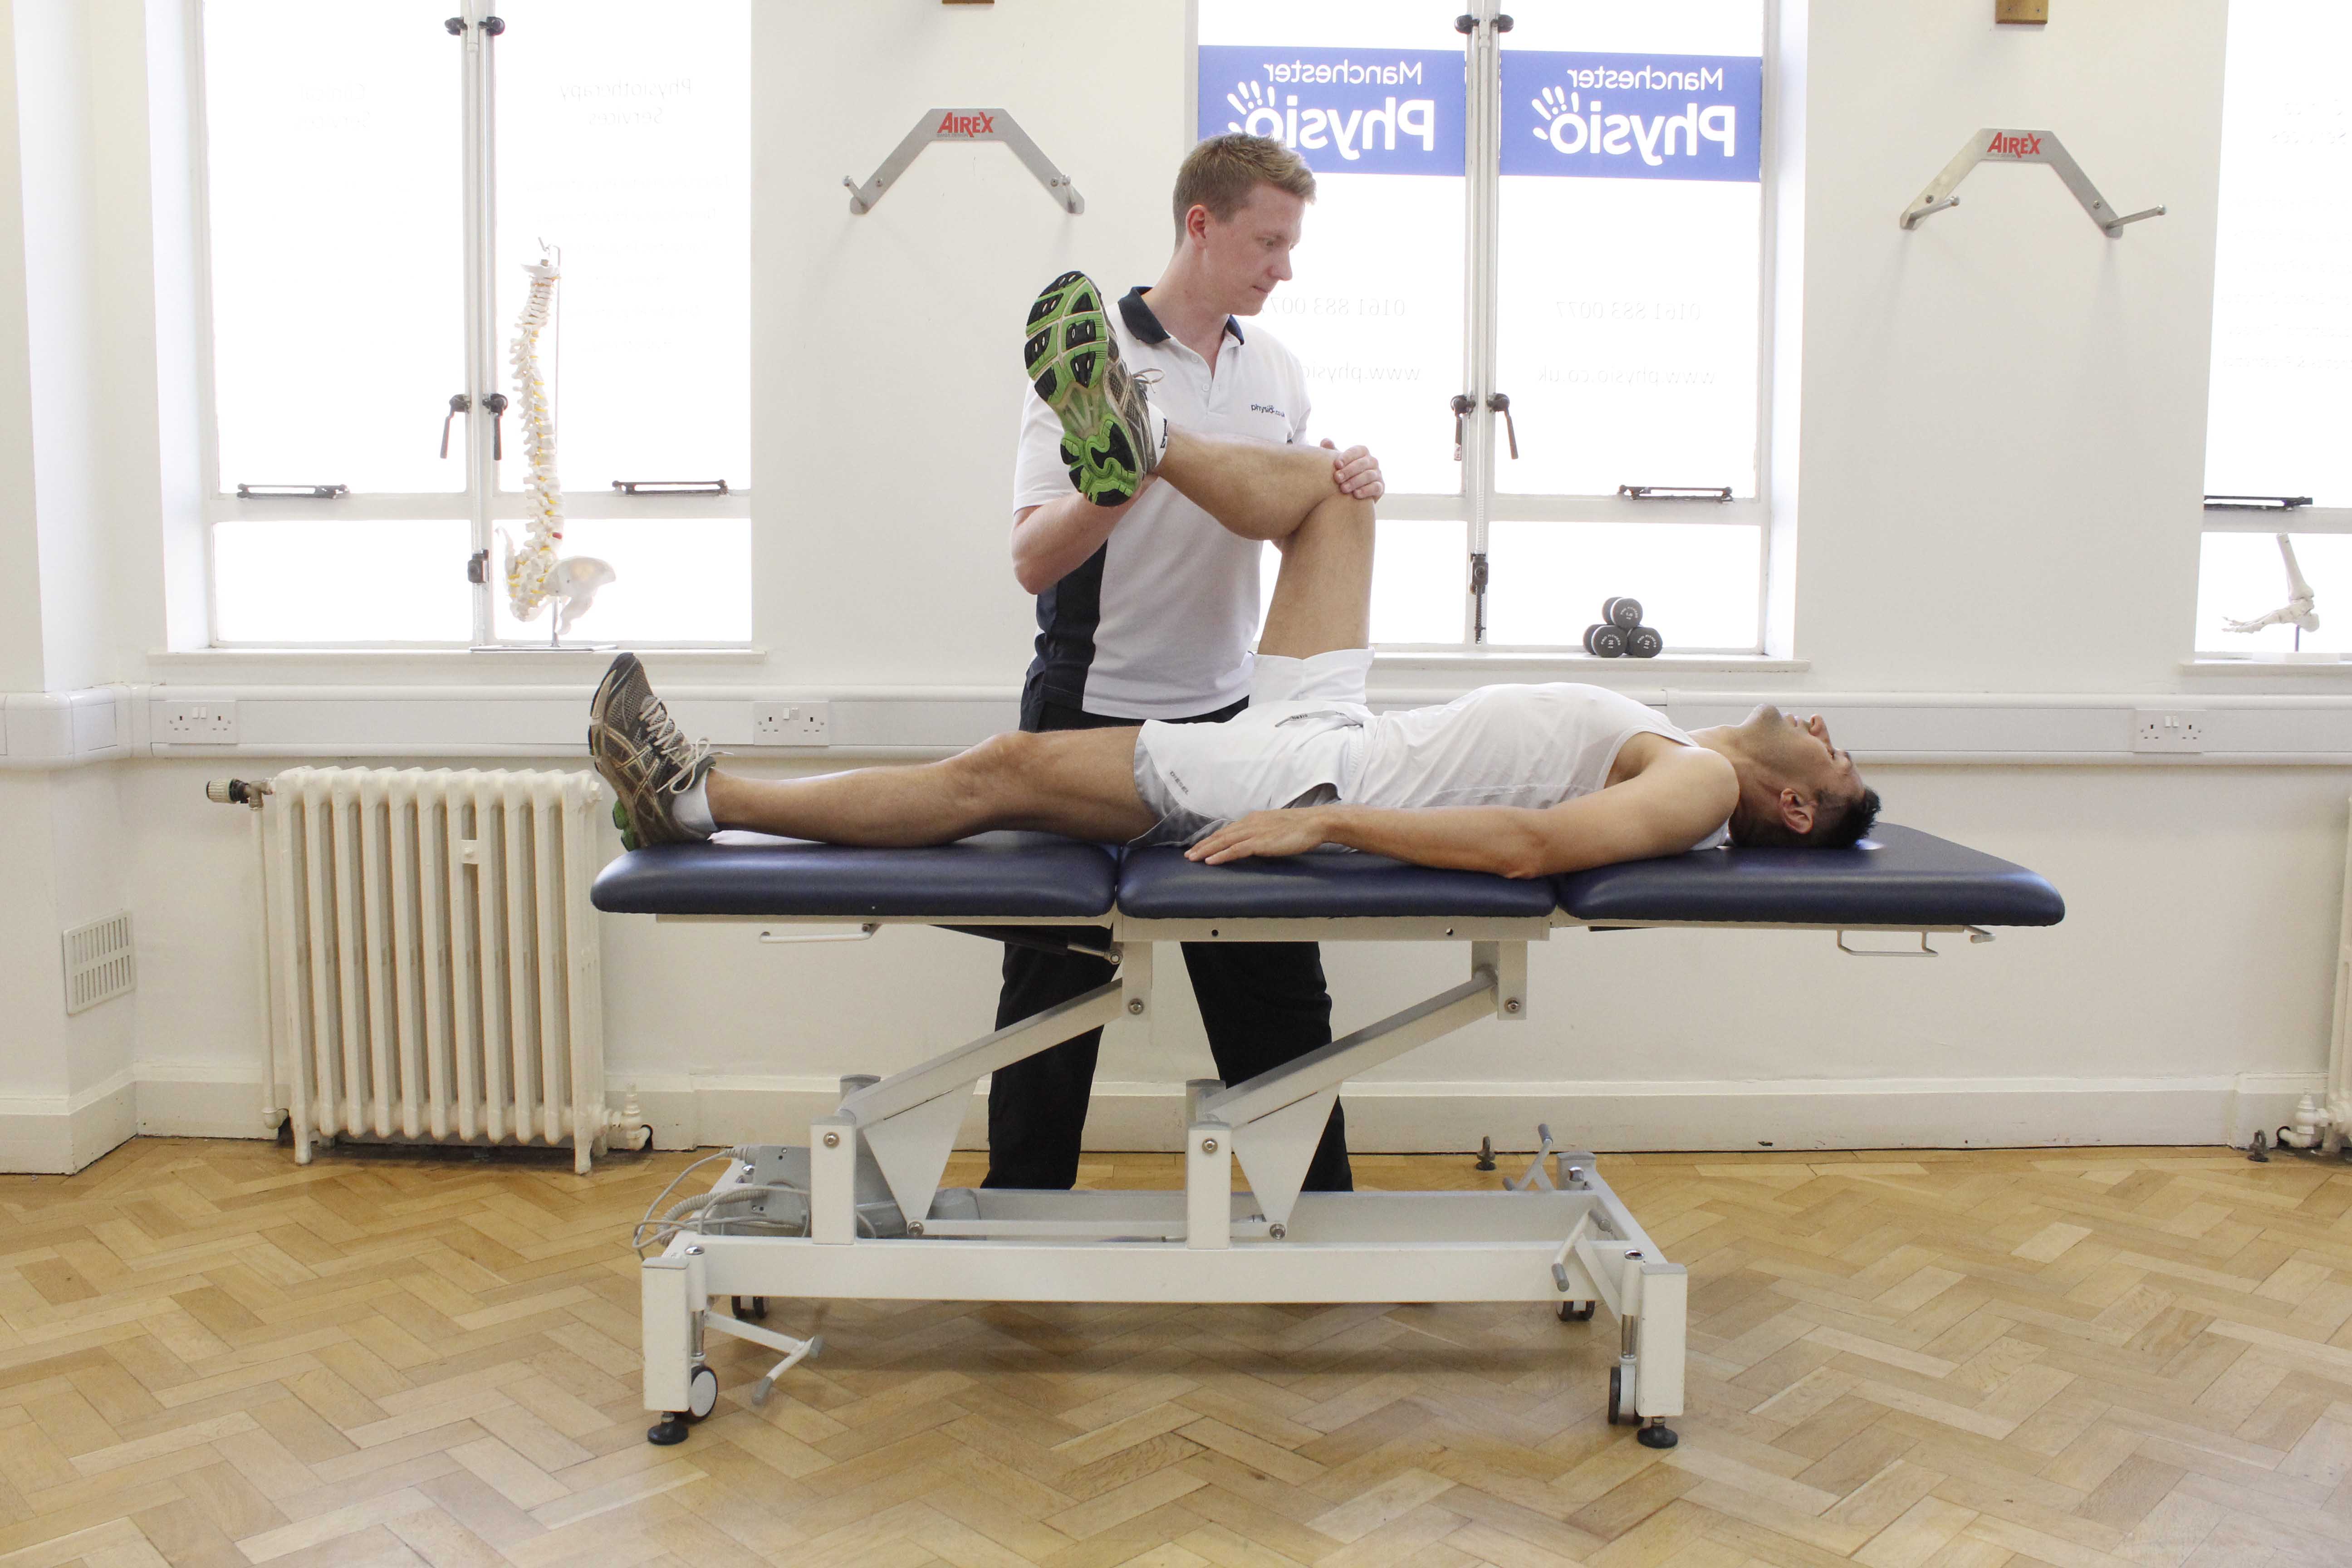 Knee stretches and joint mobilisations performed by an experienced physiotherapist